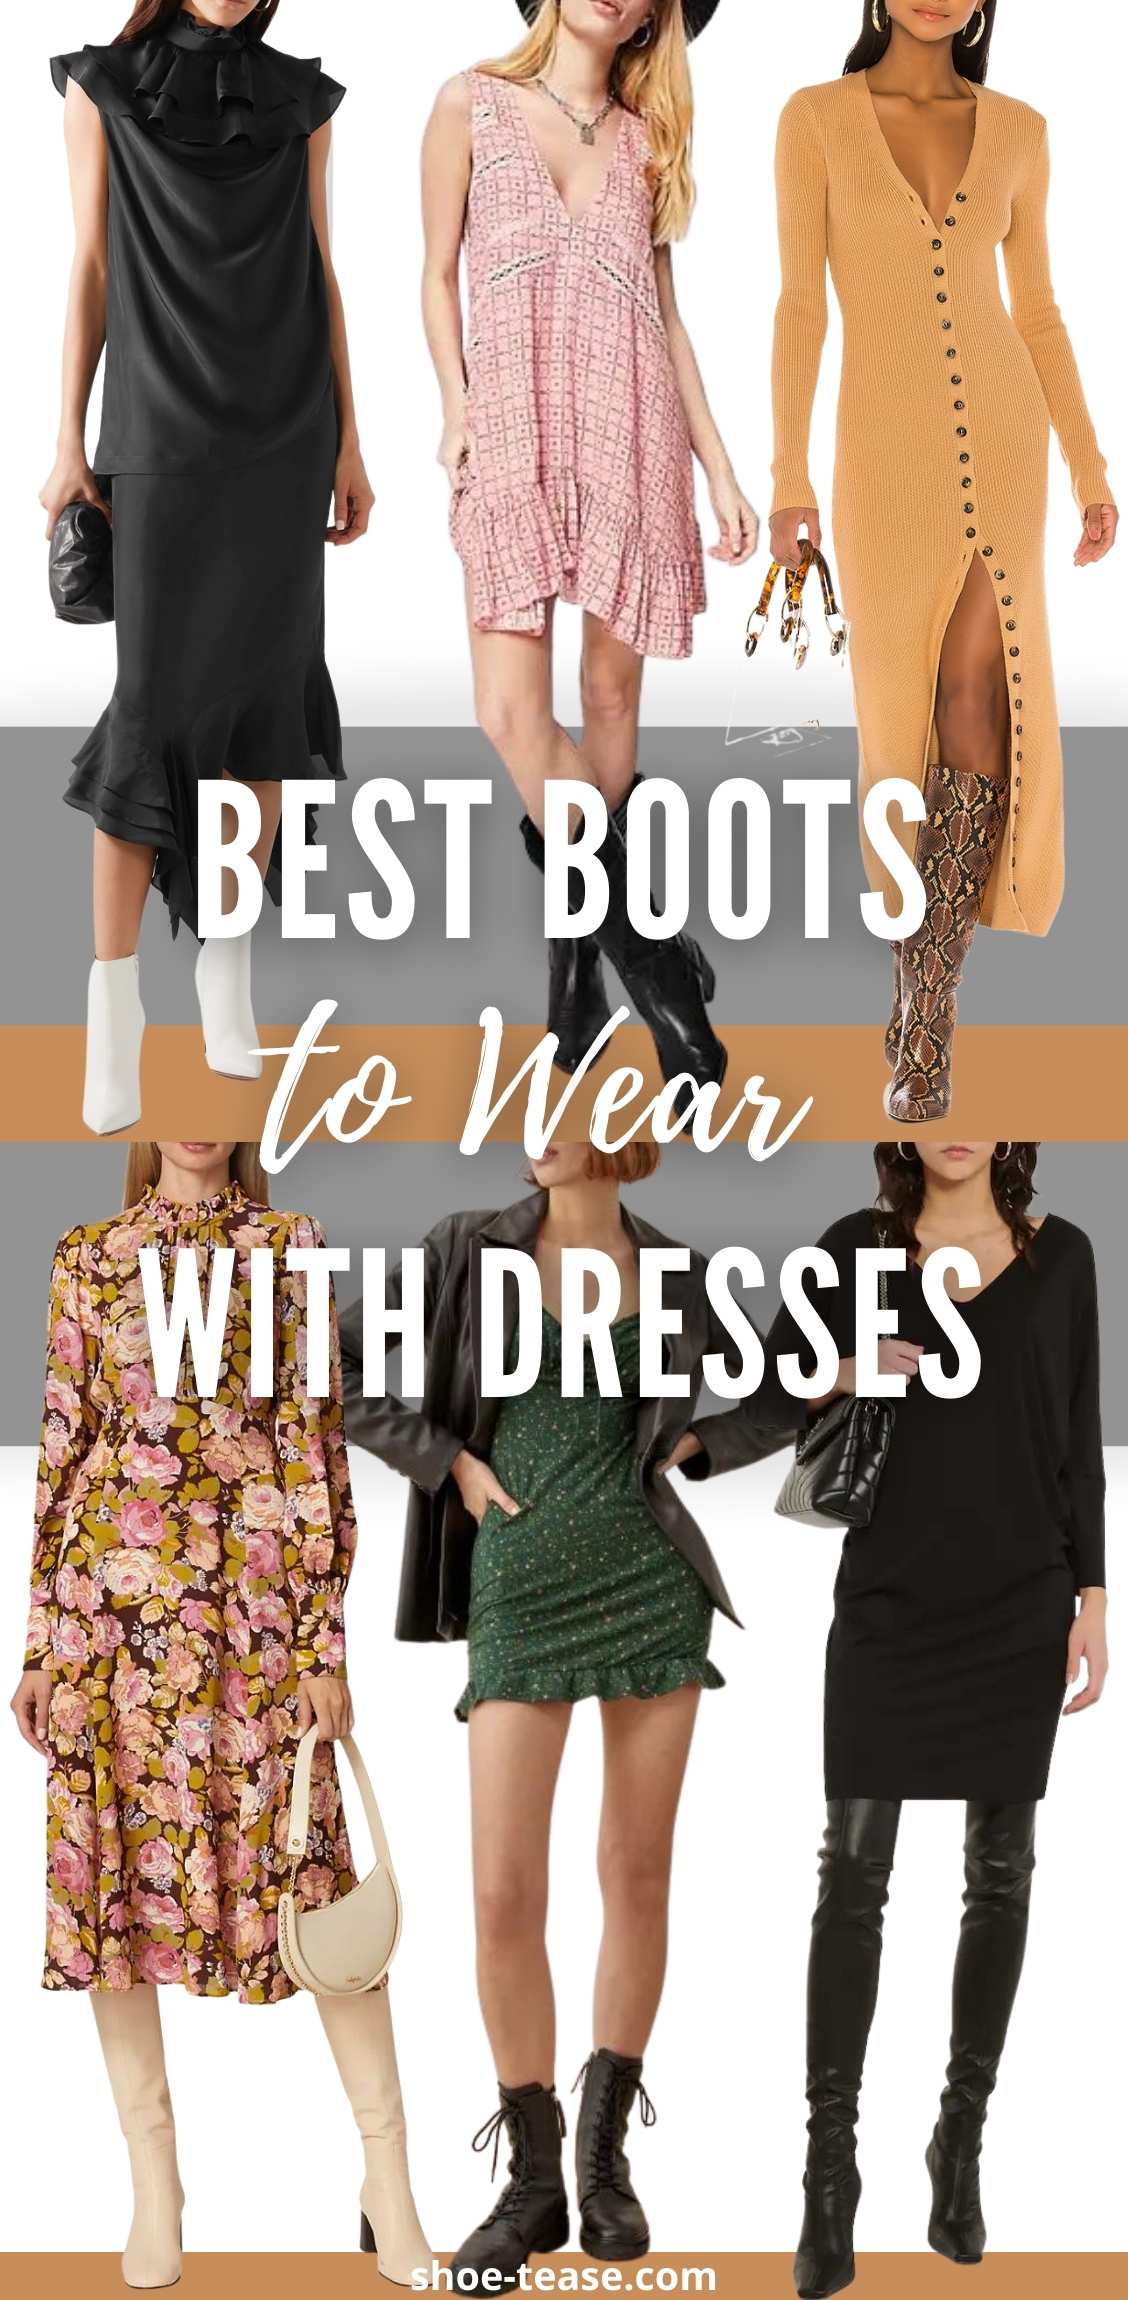 Lada magician Smash 7 Best Boots to Wear with Dresses (with Photos) + 35 Ways to Style Them!